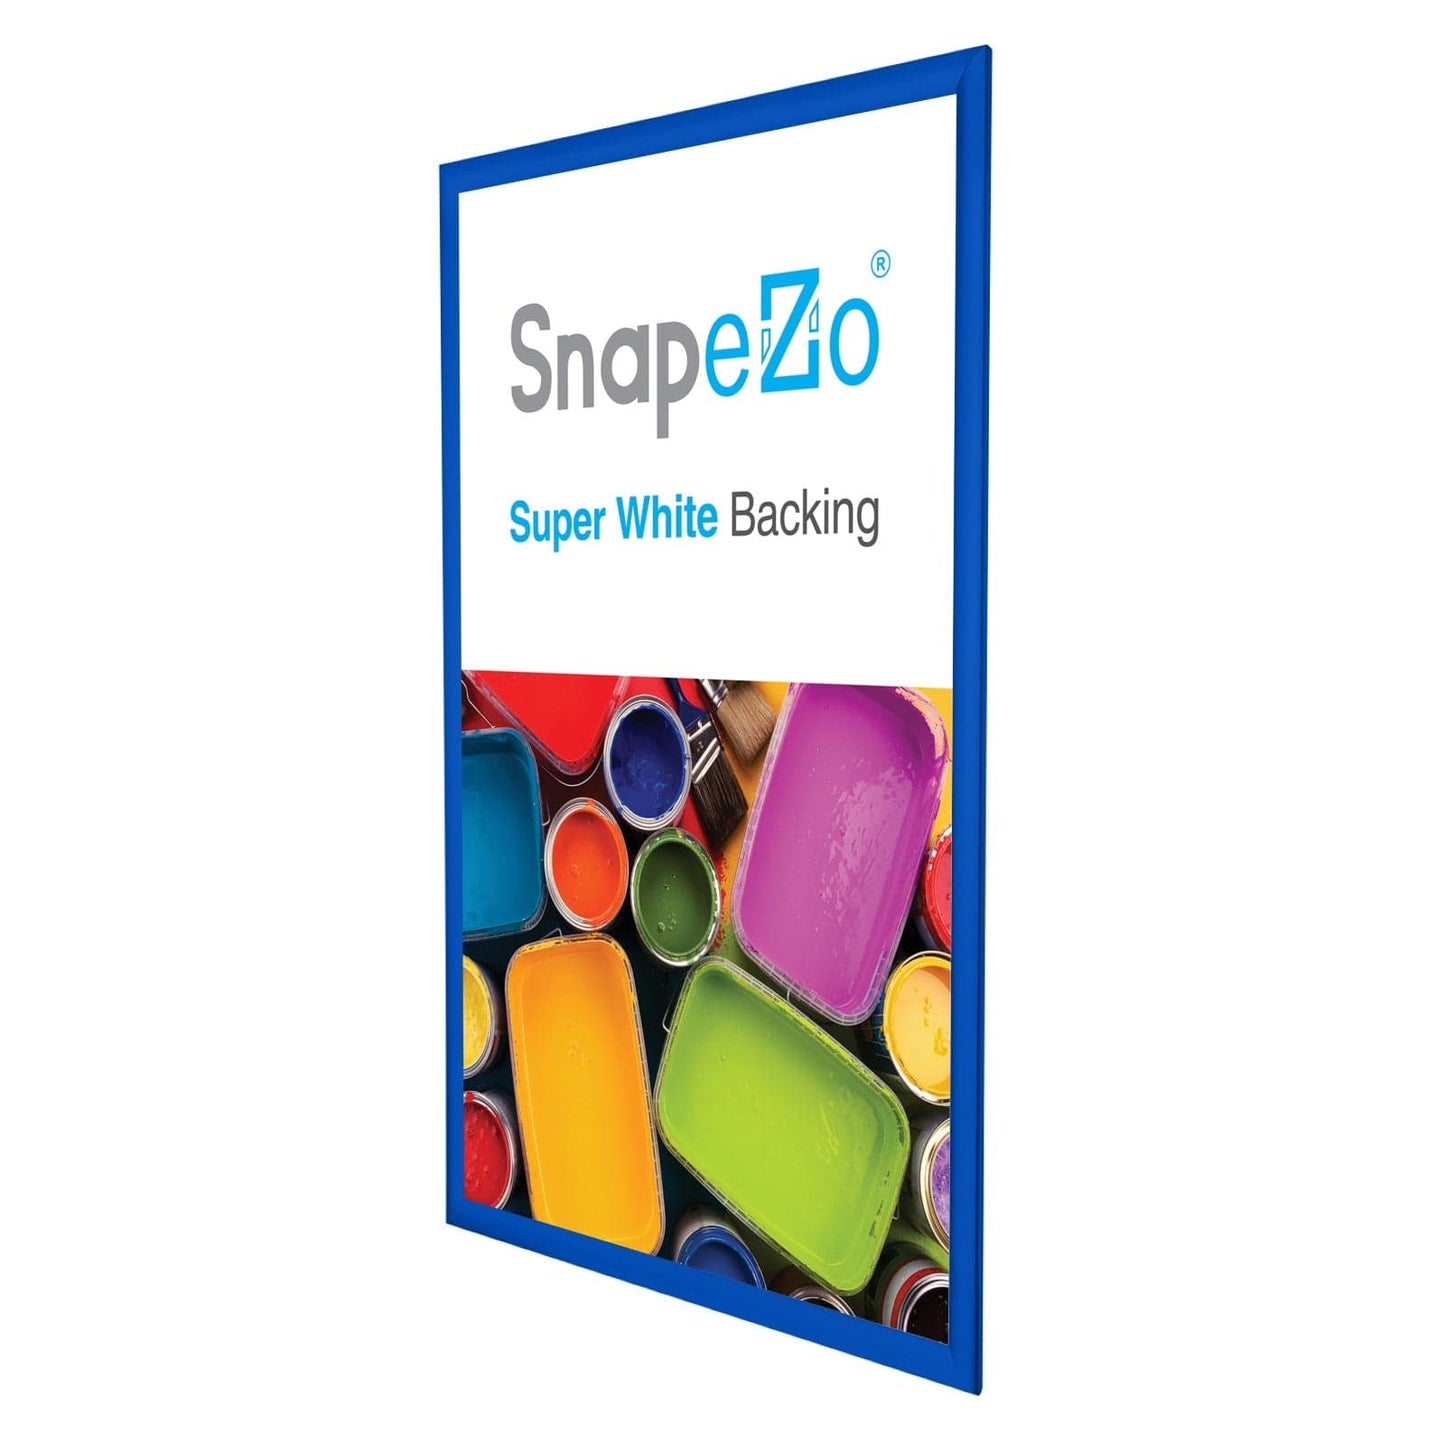 25x37 Blue SnapeZo® Snap Frame - 1.2" Profile - Snap Frames Direct